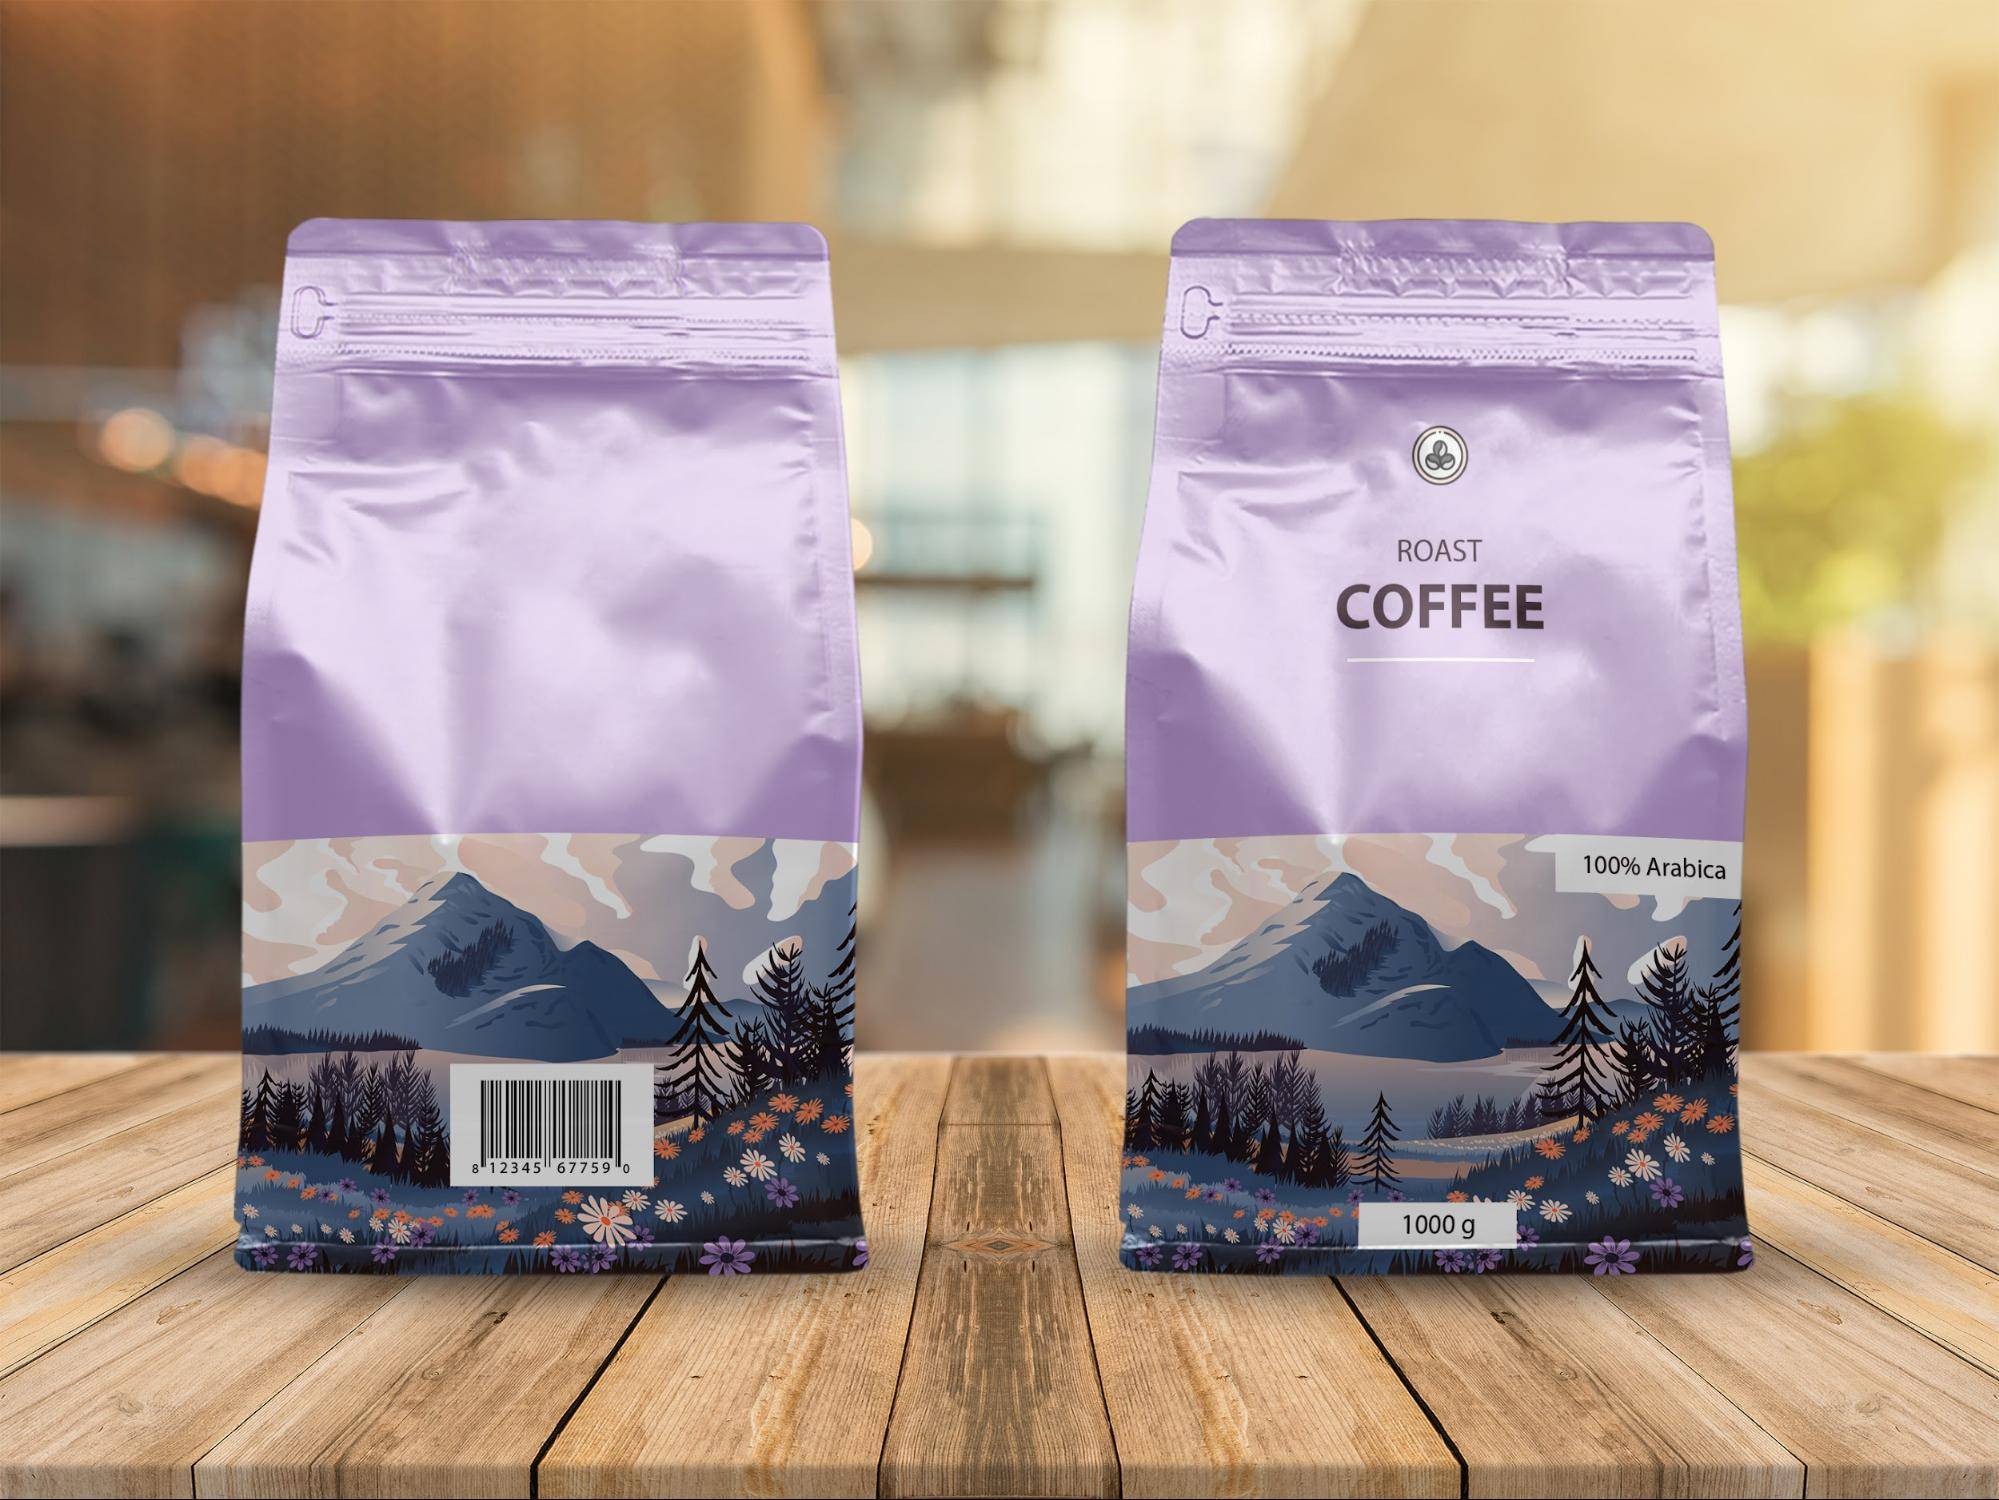 Two flexible bags of coffee